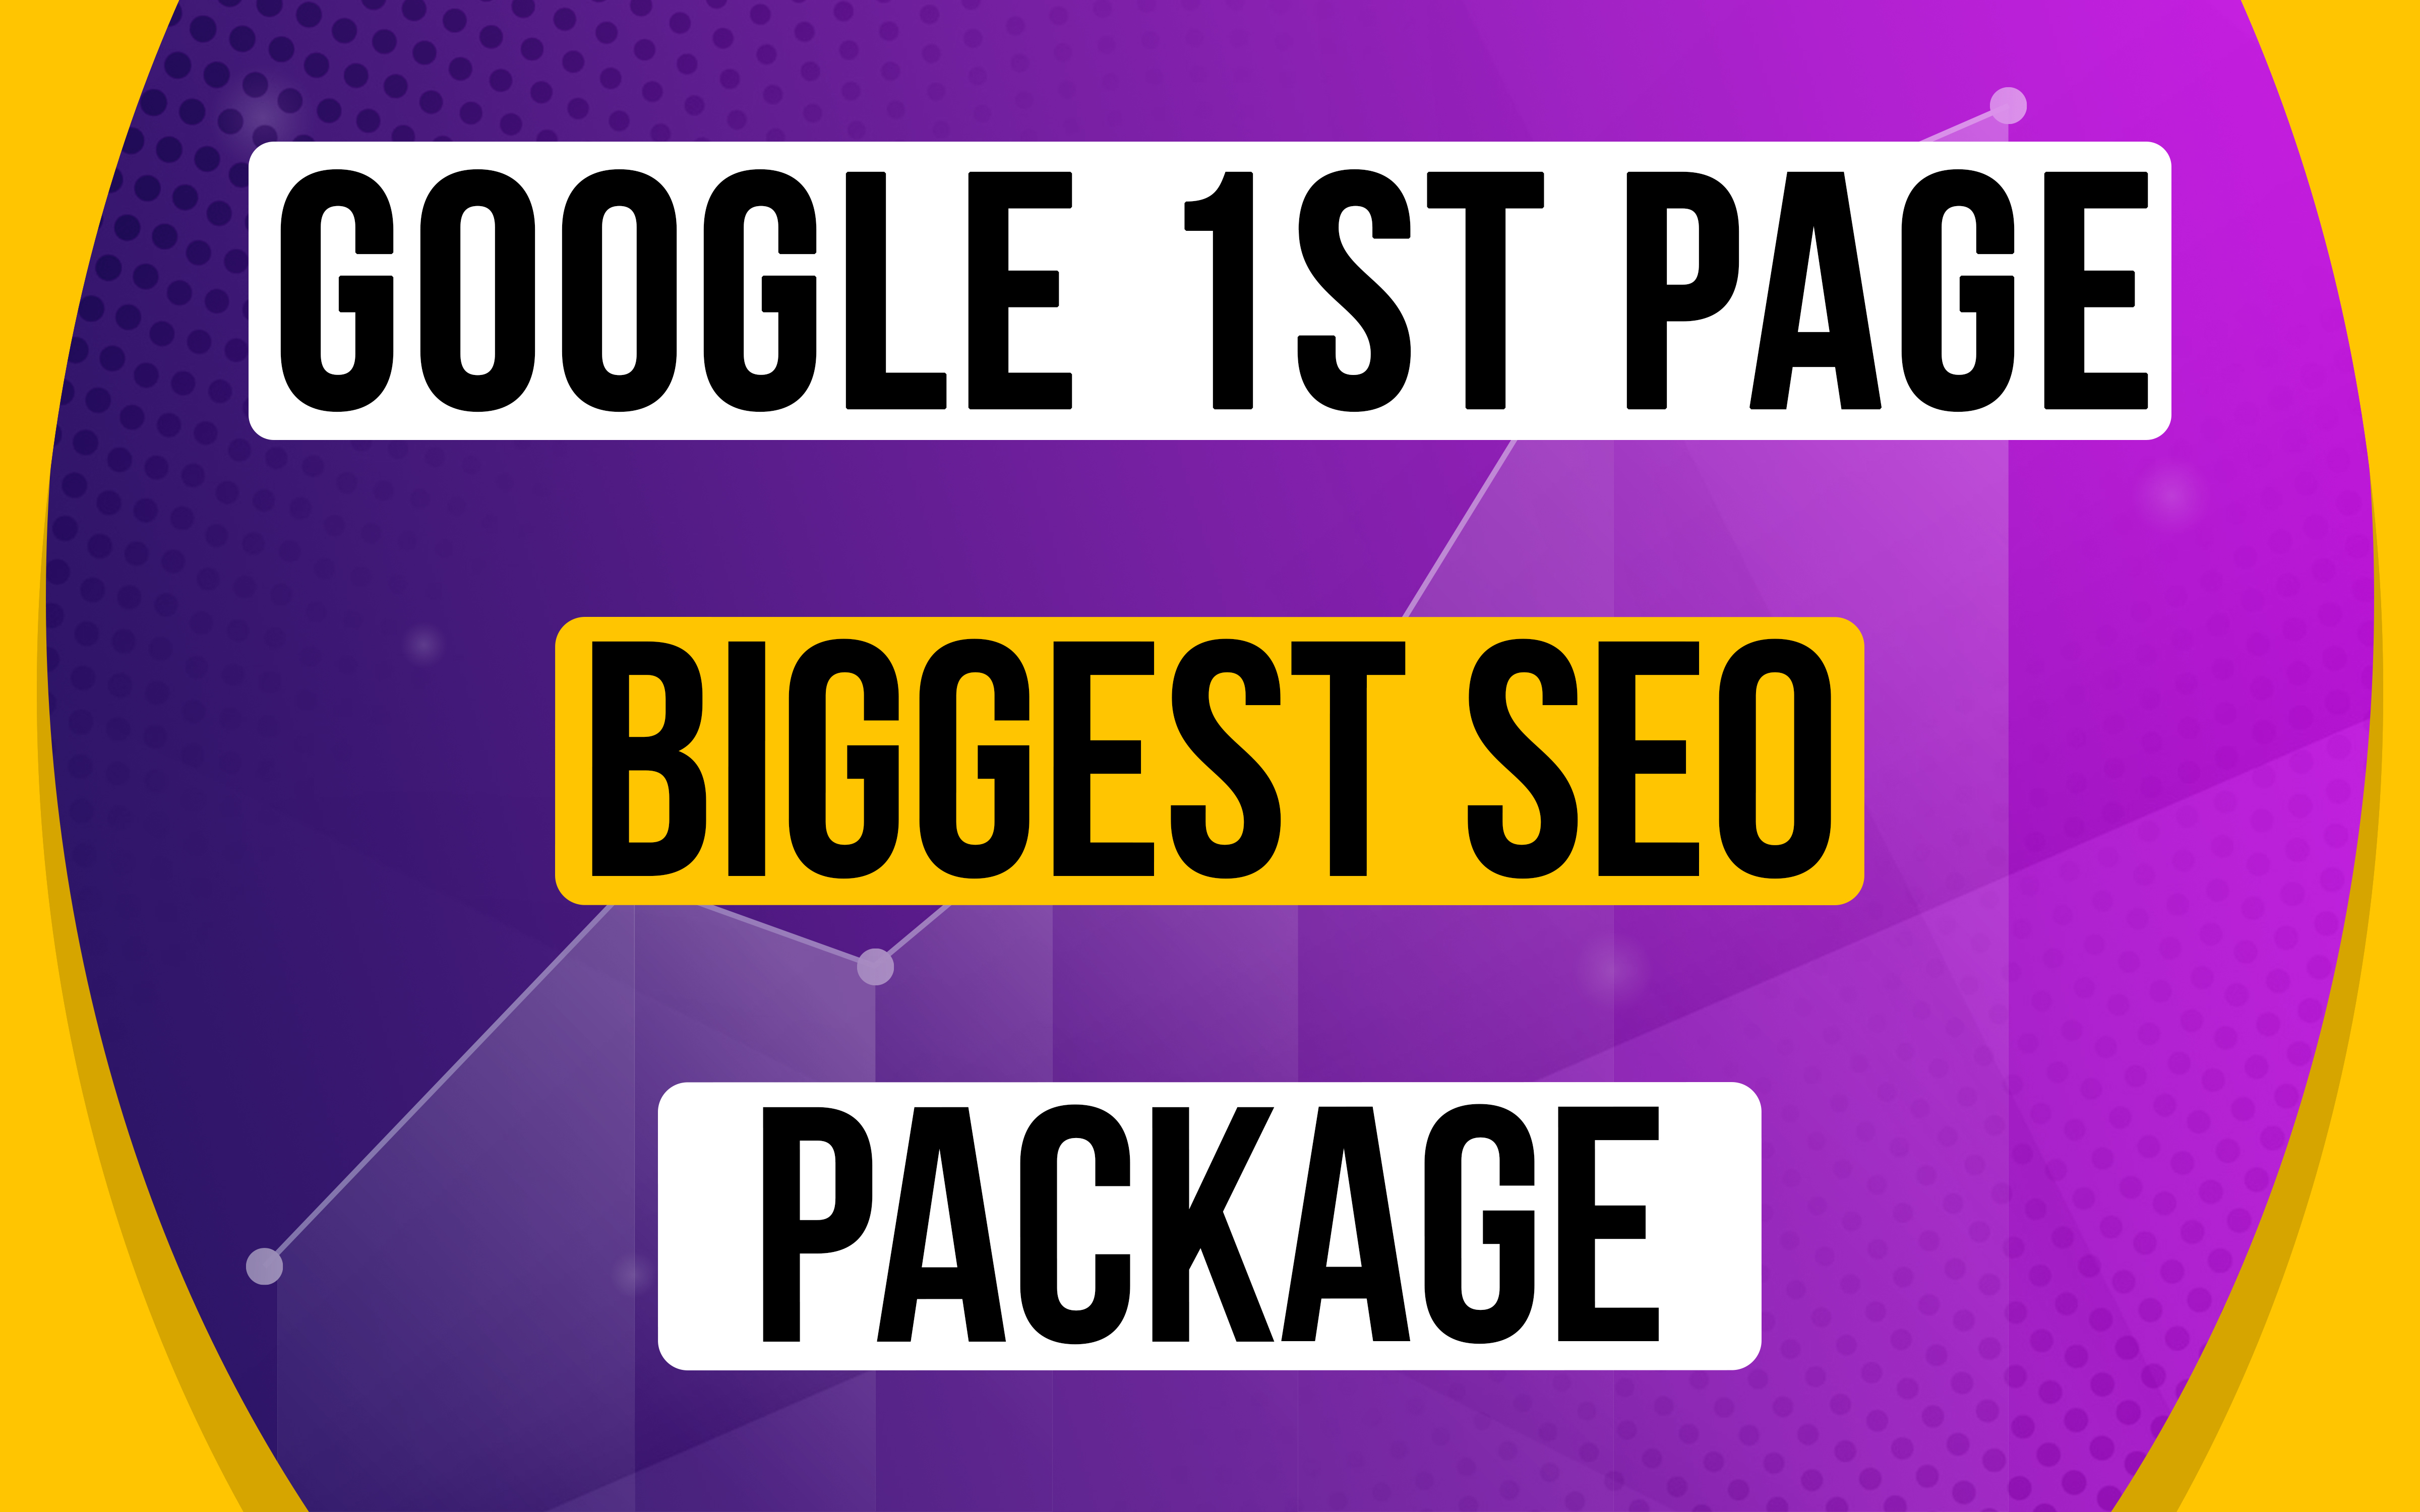 PAGE 1 Booster Biggest Seo Package - Guaranteed Result Or Money Back